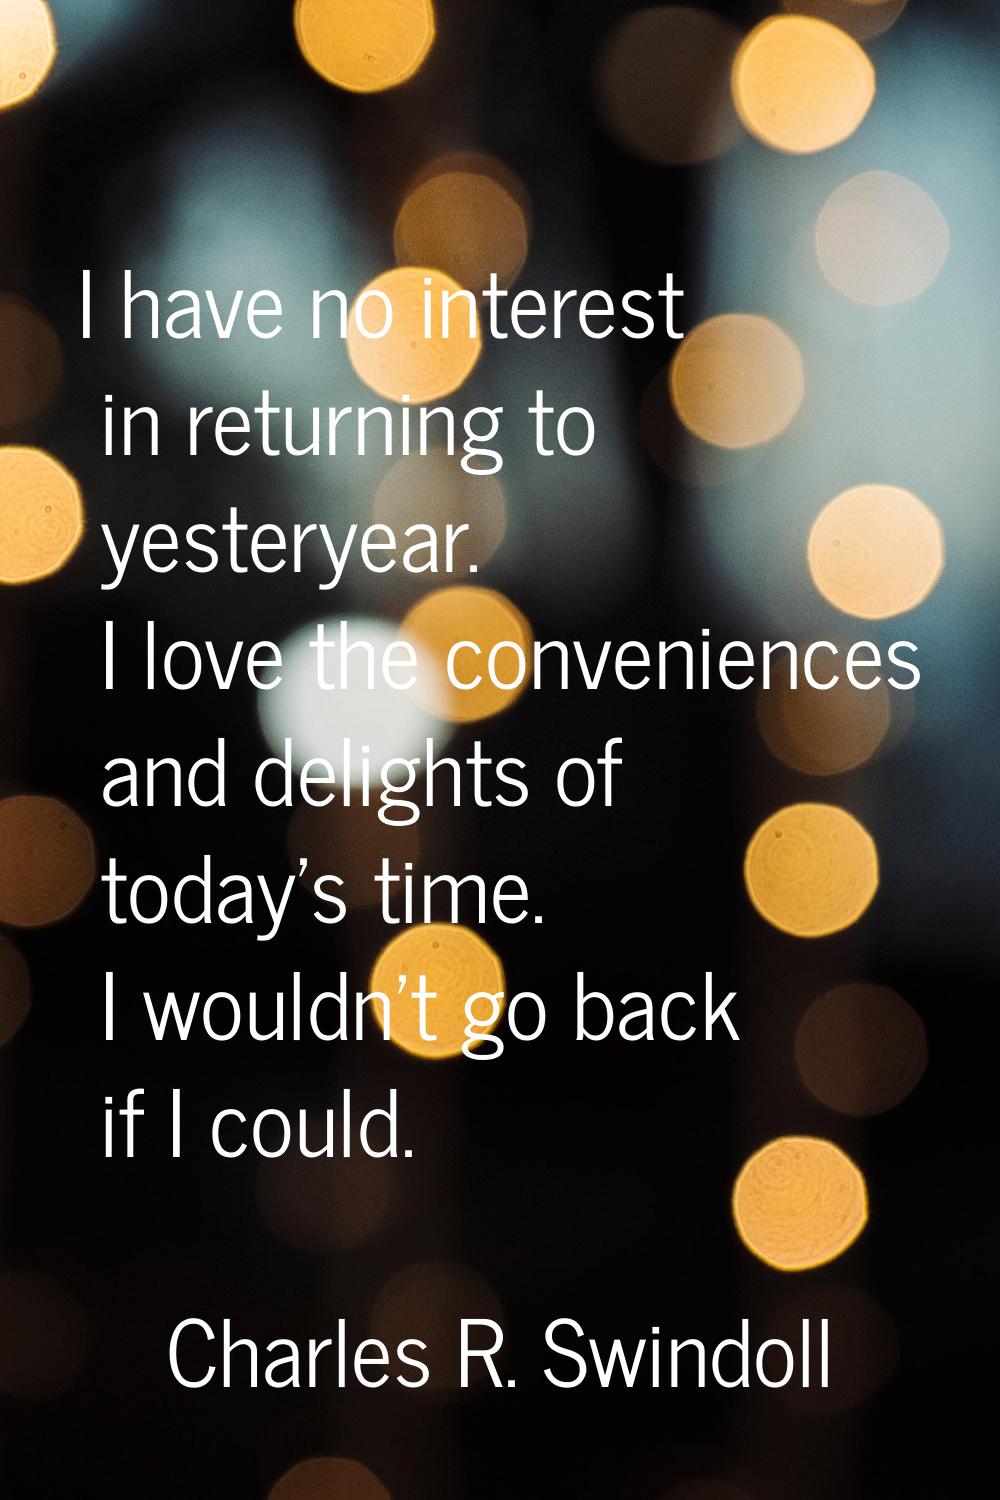 I have no interest in returning to yesteryear. I love the conveniences and delights of today's time